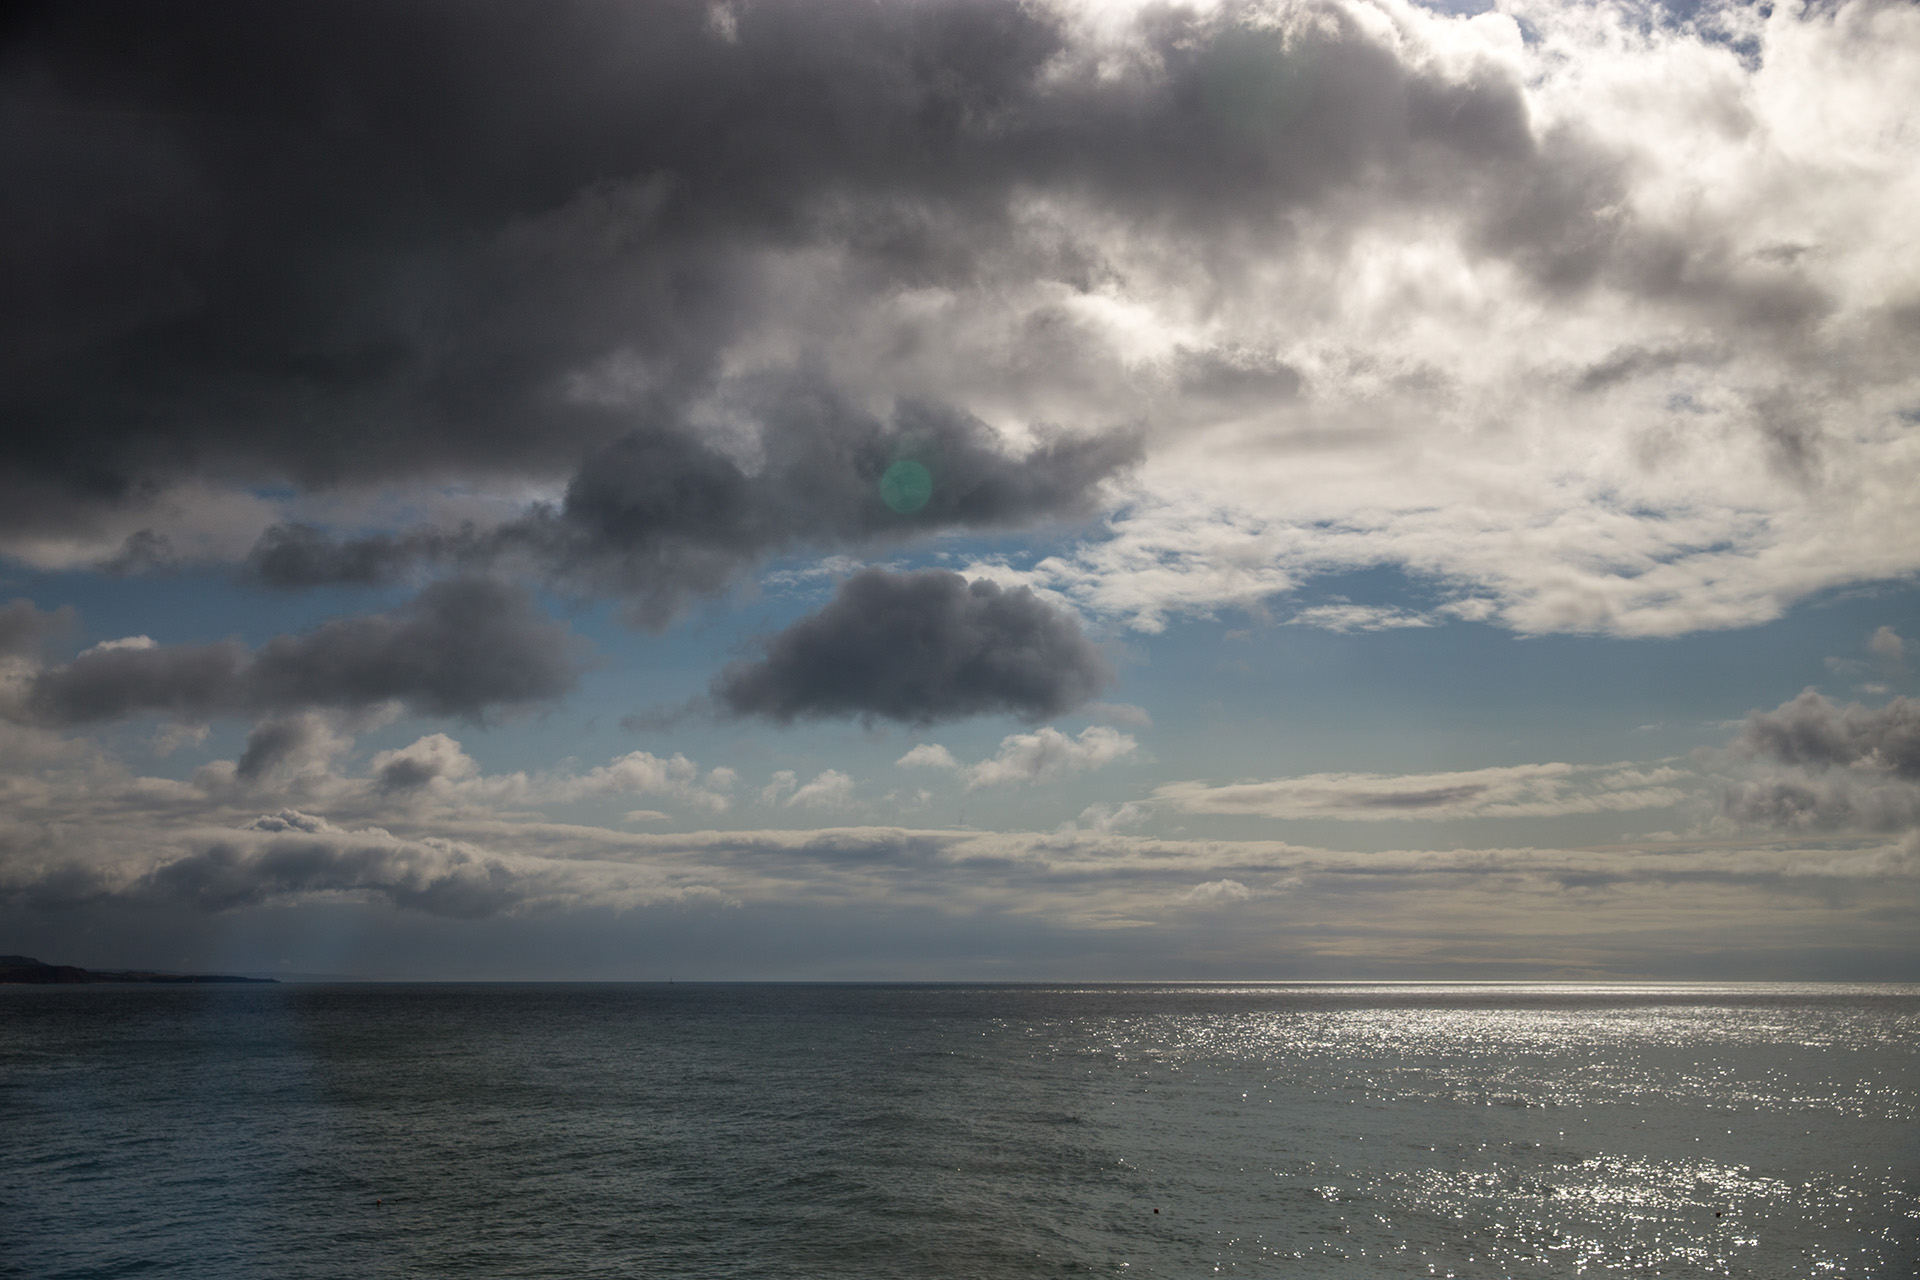 View of the coast from Hope Cove, Devon. Unusually calm, it will change – quicker than you think.